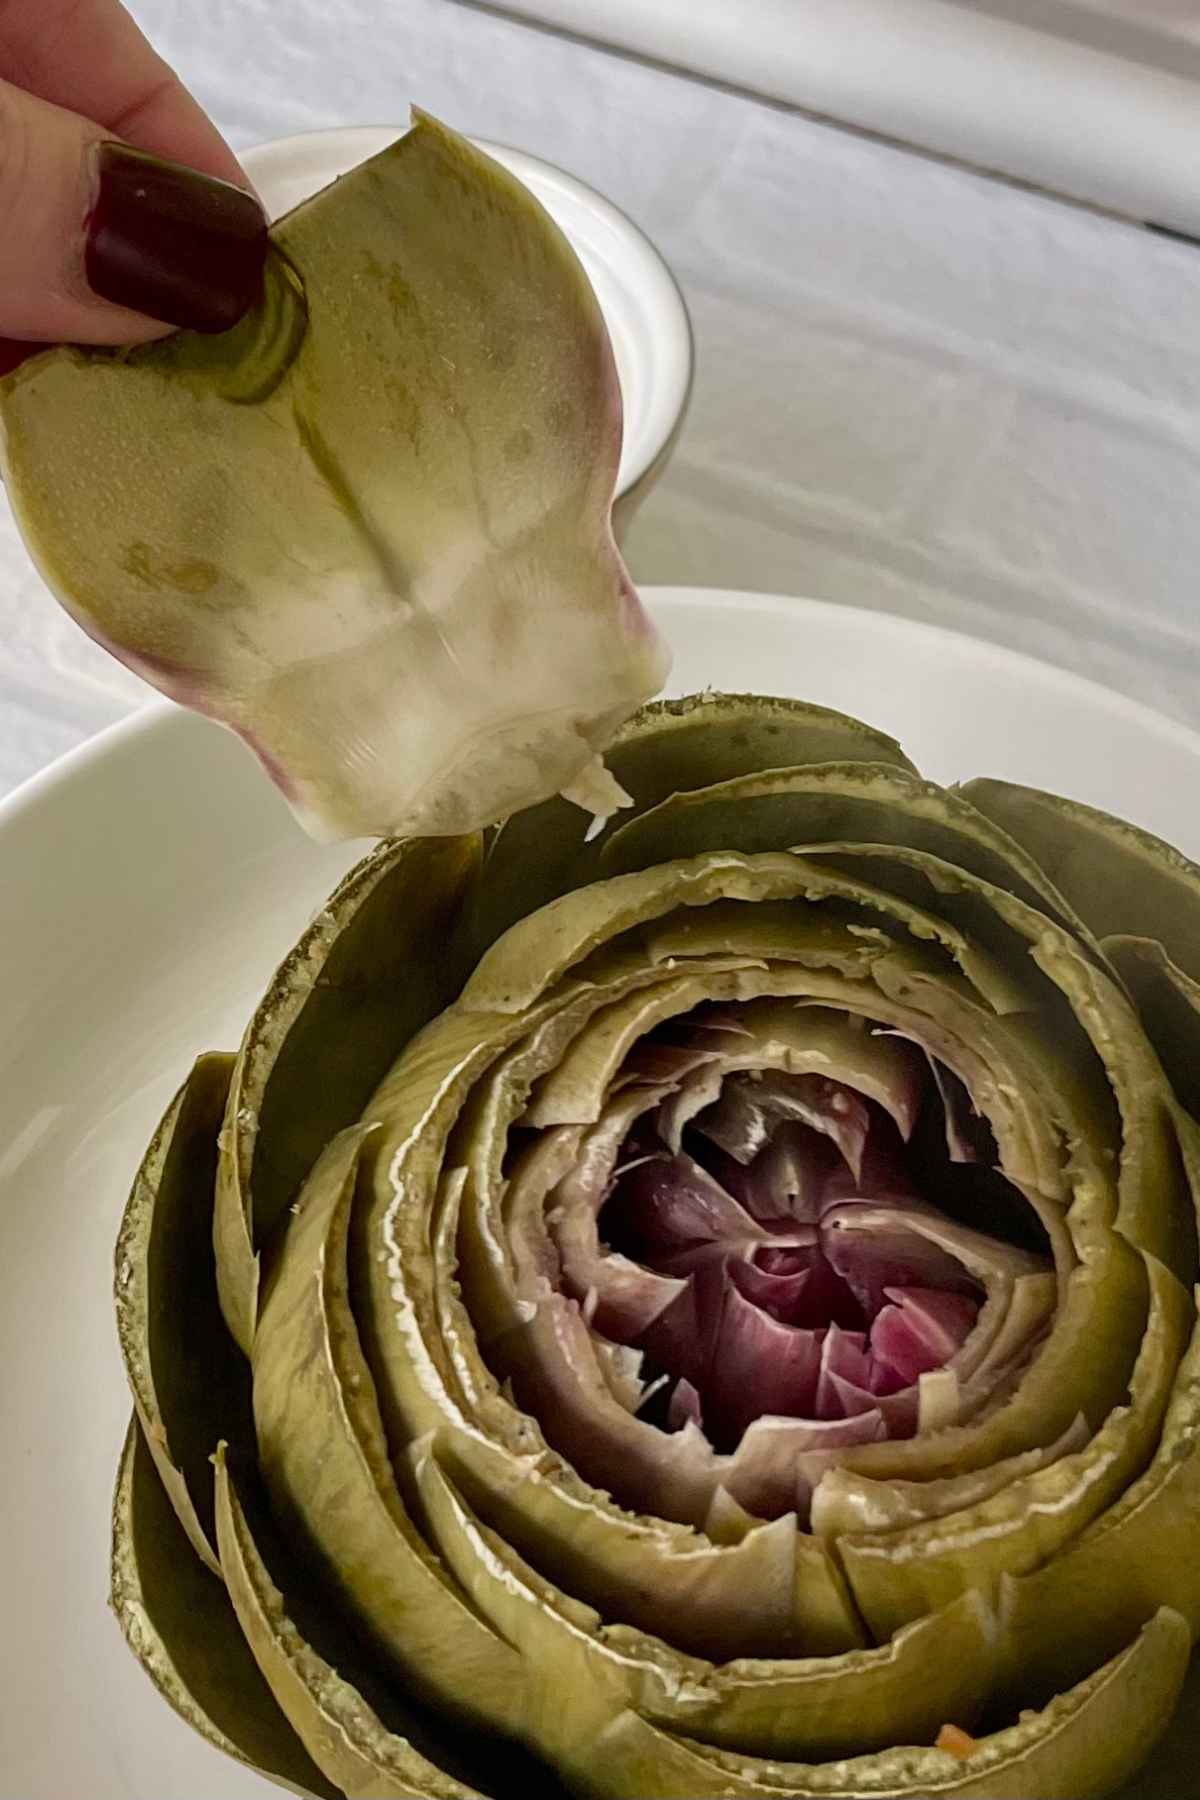 Removing a leaf from the artichoke.